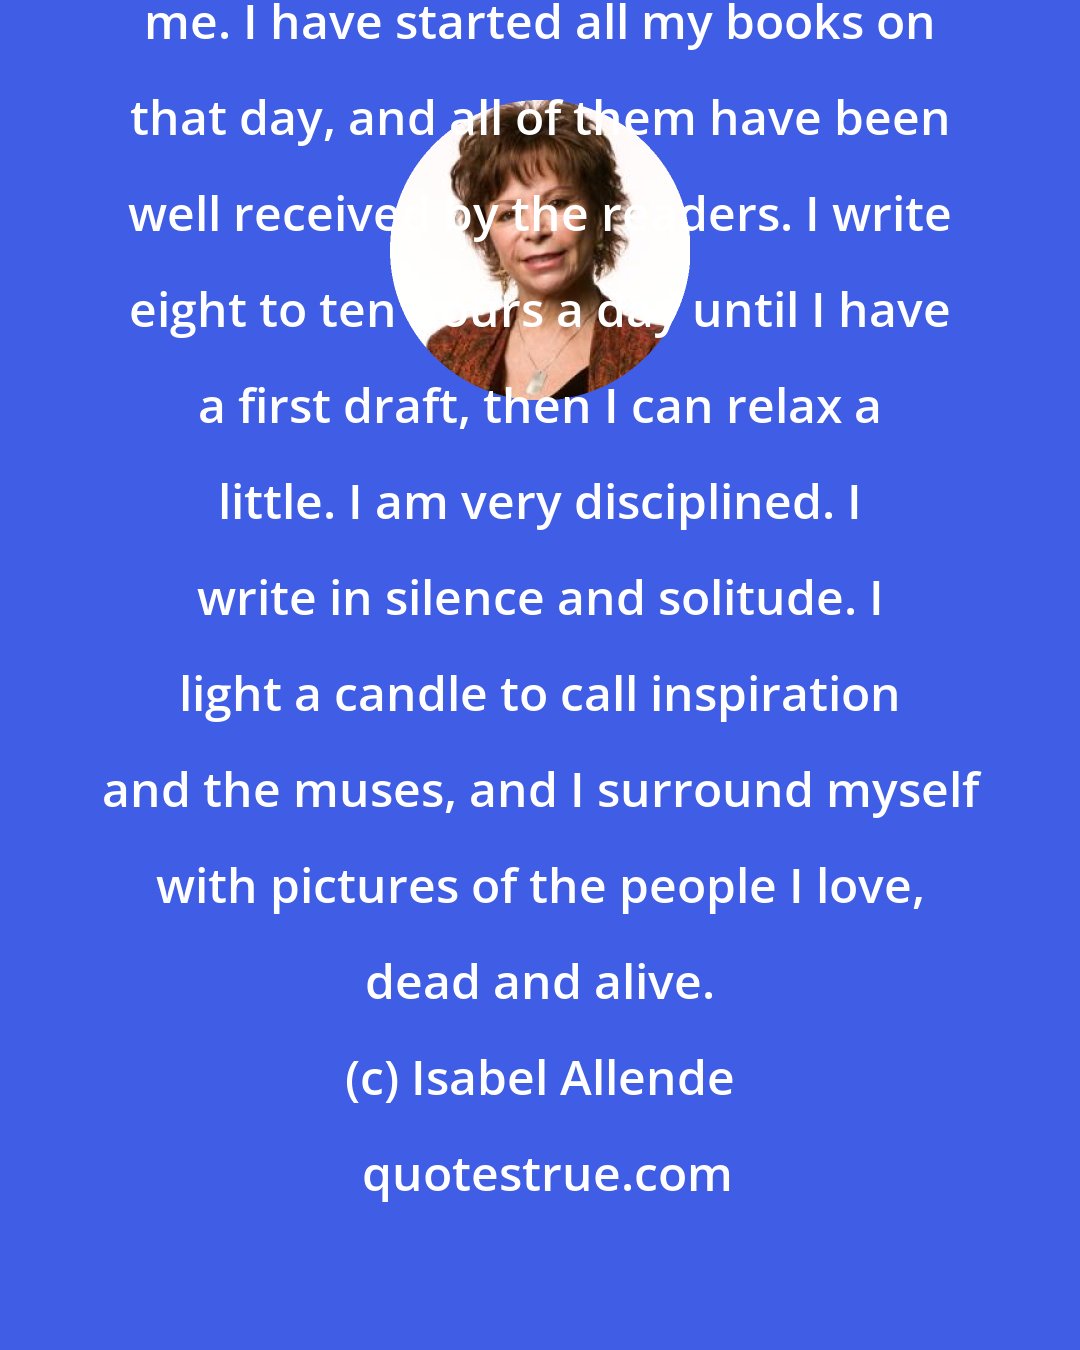 Isabel Allende: January 8 has been a lucky day for me. I have started all my books on that day, and all of them have been well received by the readers. I write eight to ten hours a day until I have a first draft, then I can relax a little. I am very disciplined. I write in silence and solitude. I light a candle to call inspiration and the muses, and I surround myself with pictures of the people I love, dead and alive.